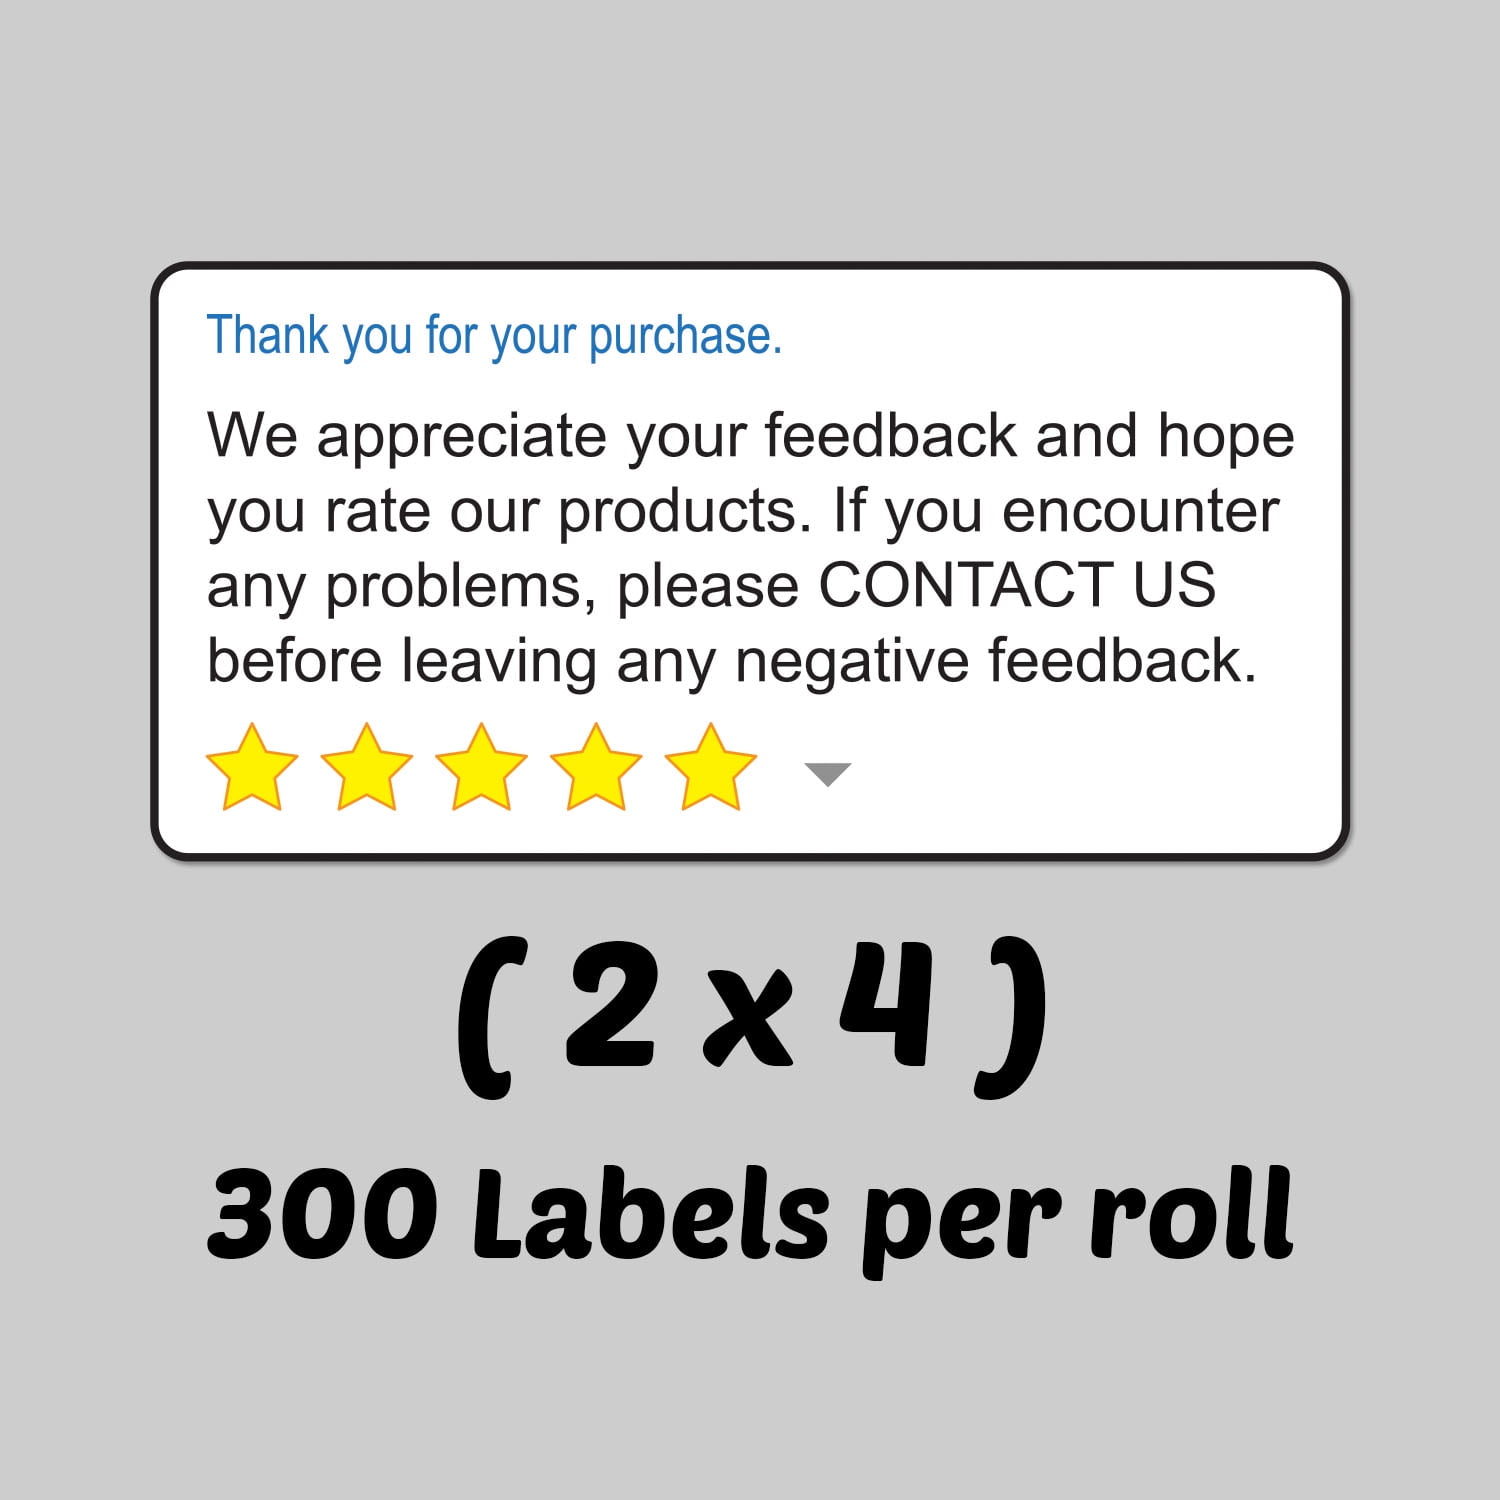 Feedback Sticker Labels Thank You for Your Purchase 2"x 4"  300 Labels per Roll 